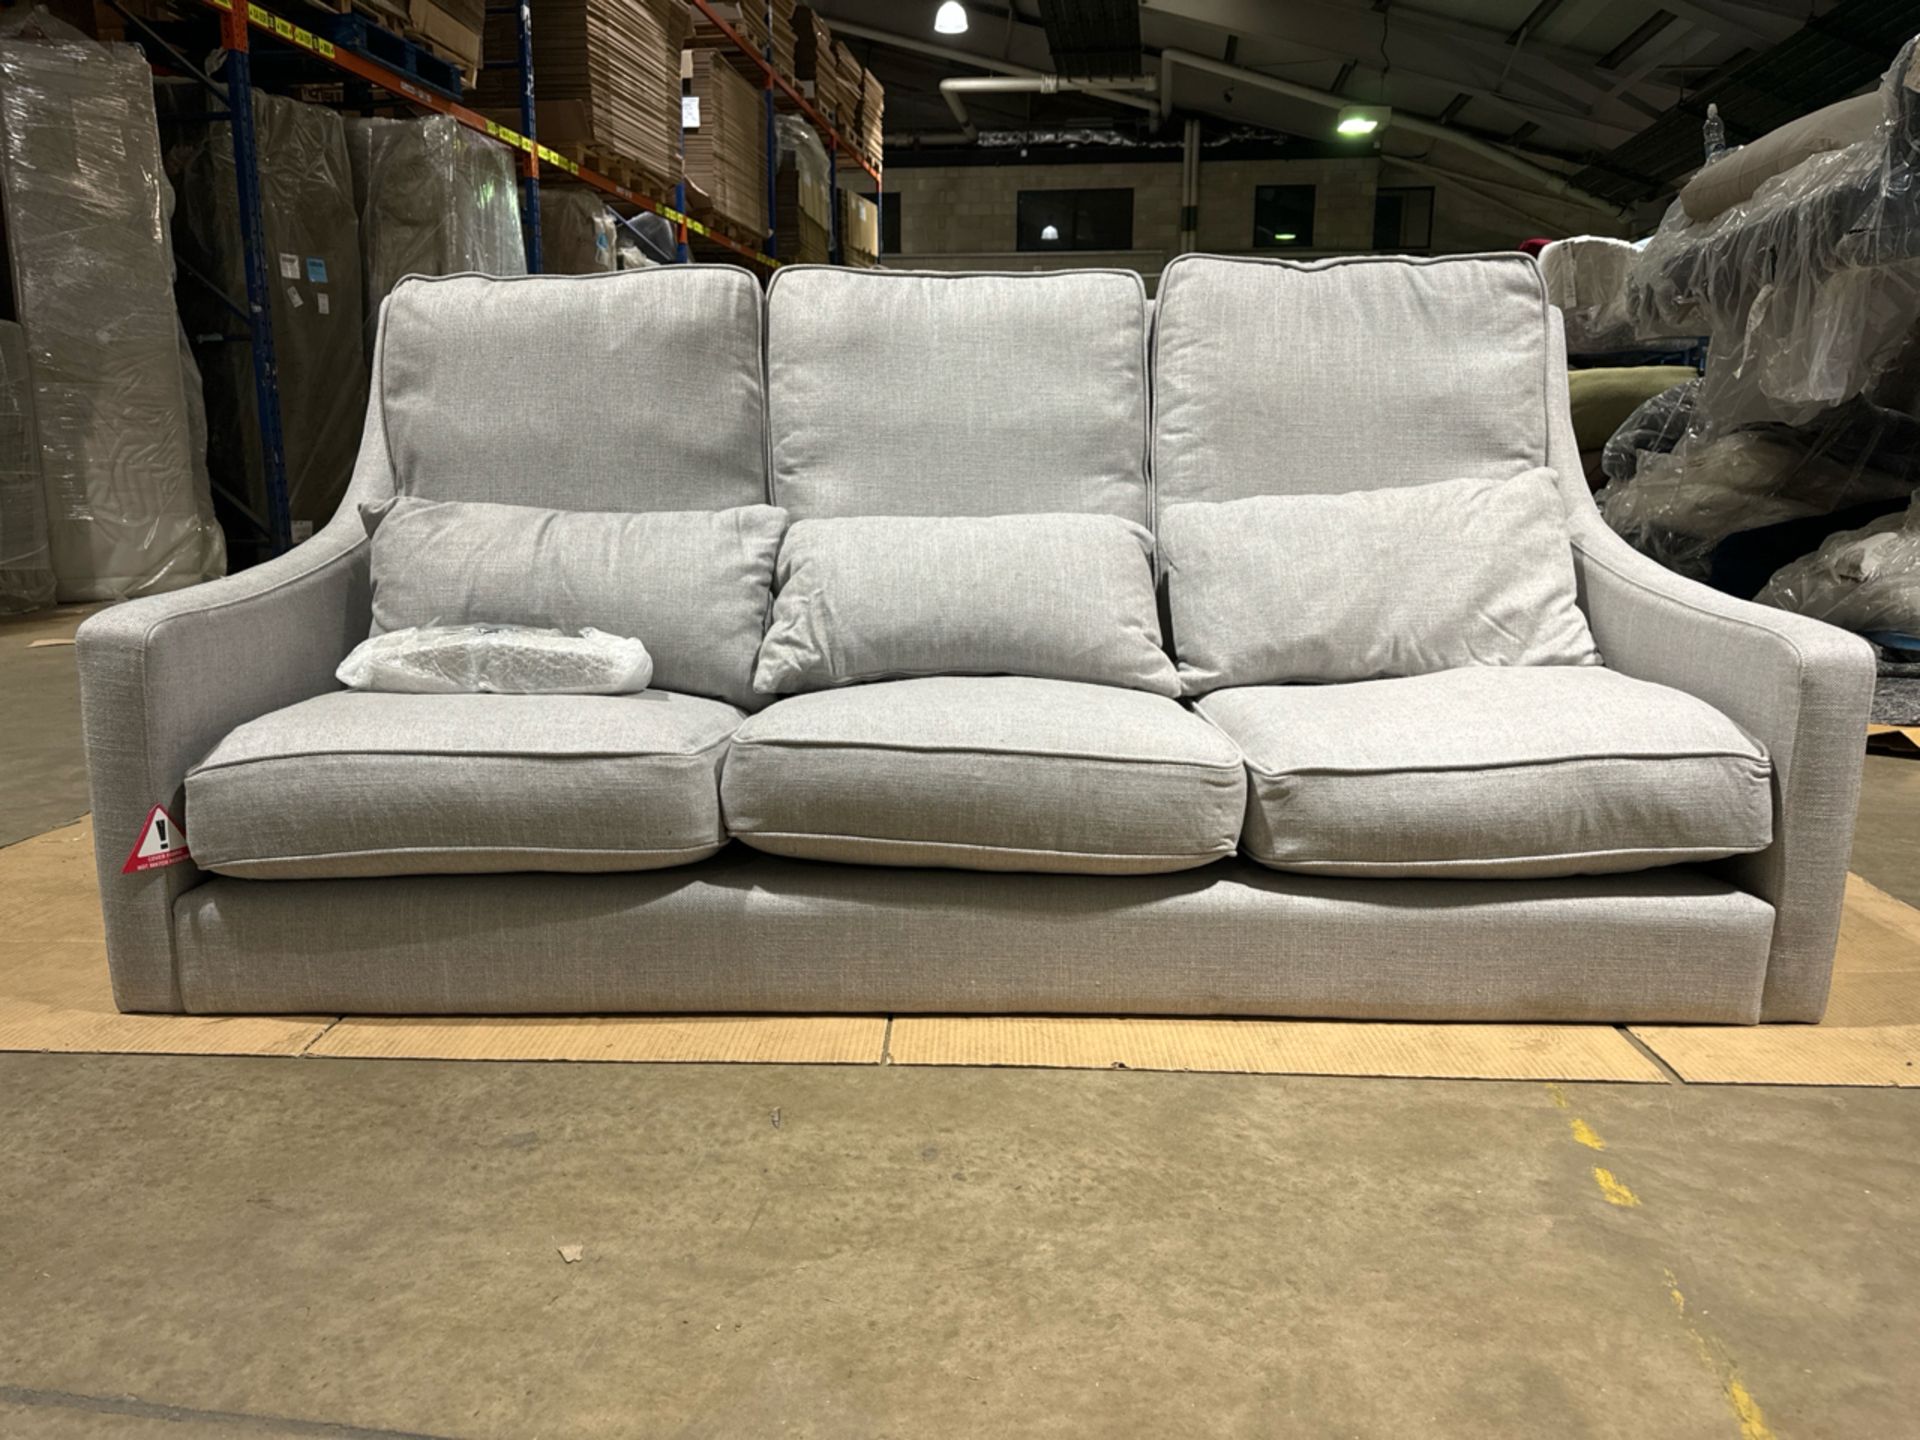 Iggy High Back 3 Seat Sofa In Rye Baylee Viscose Linen RRP - £2790 - Image 2 of 6